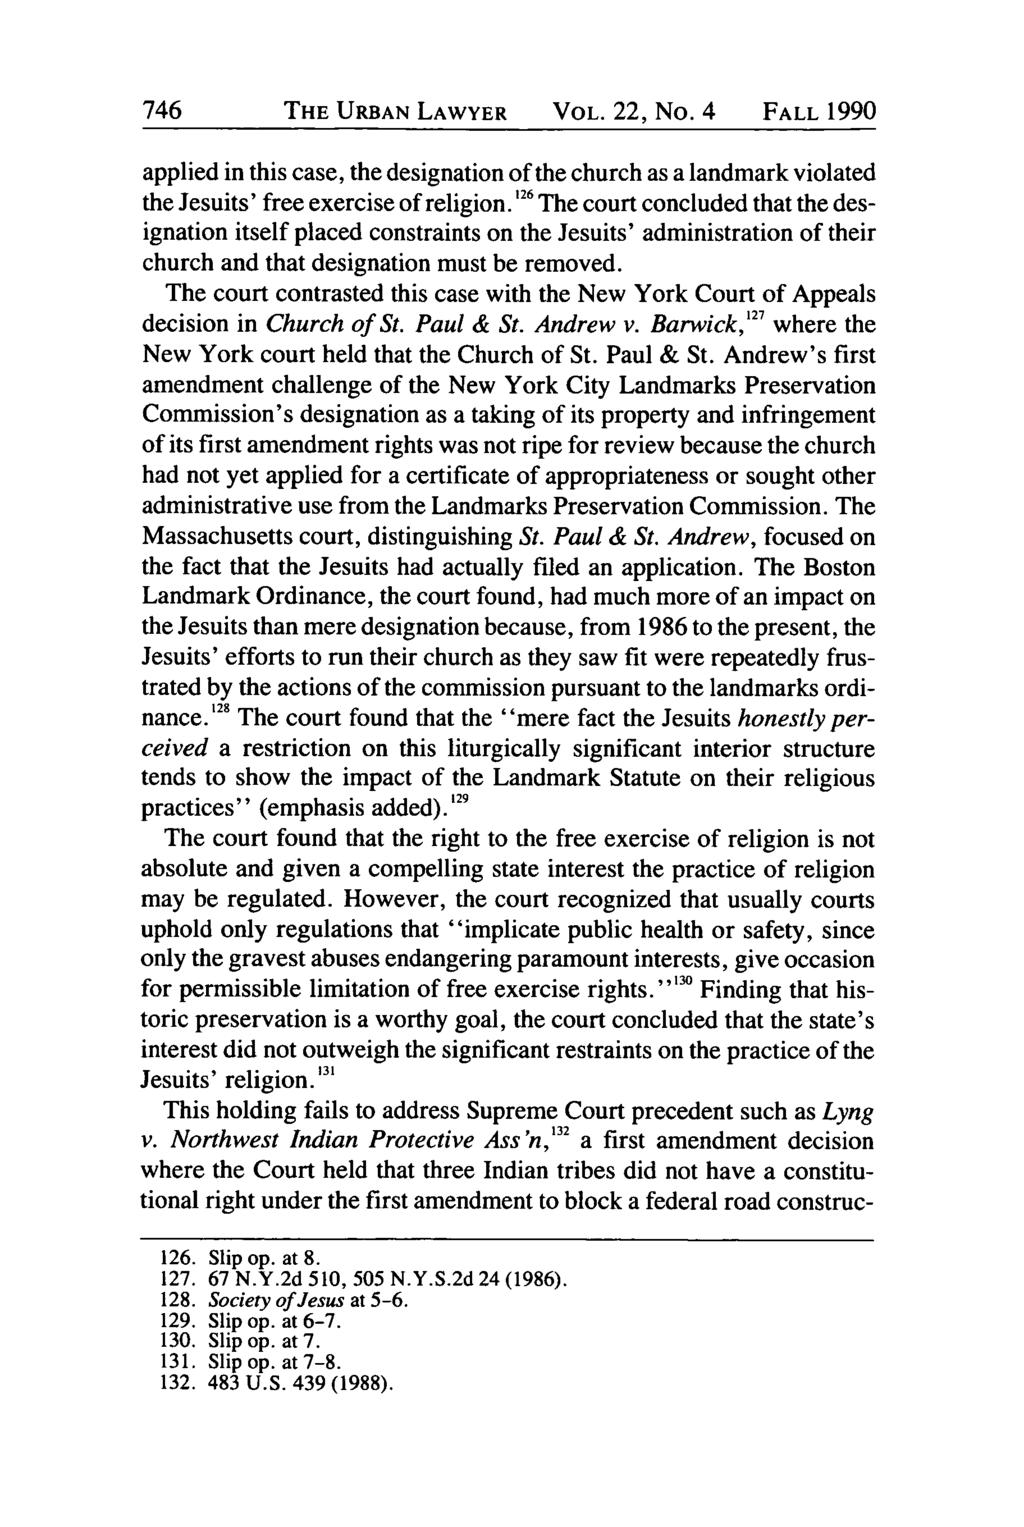 THE URBAN LAWYER VOL. 22, No. 4 FALL 1990 applied in this case, the designation of the church as a landmark violated the Jesuits' free exercise of religion.